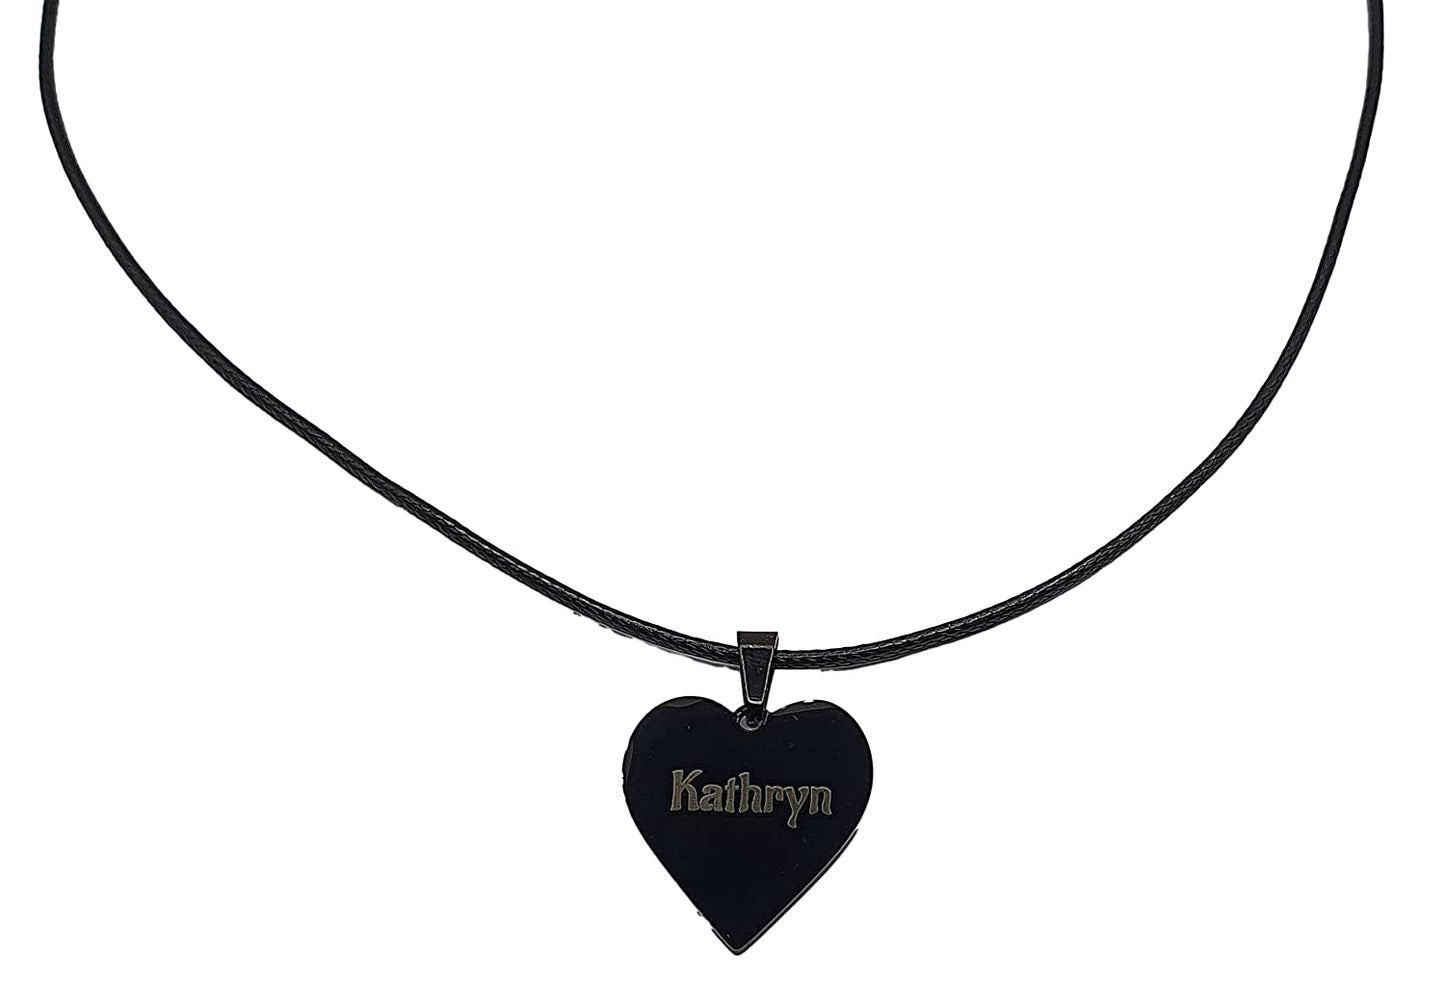 Engraved Black Heart Pendant & Necklace with Gift Bag - Personalise with any name 23mm x 25mm Stainless Steel Jewellery